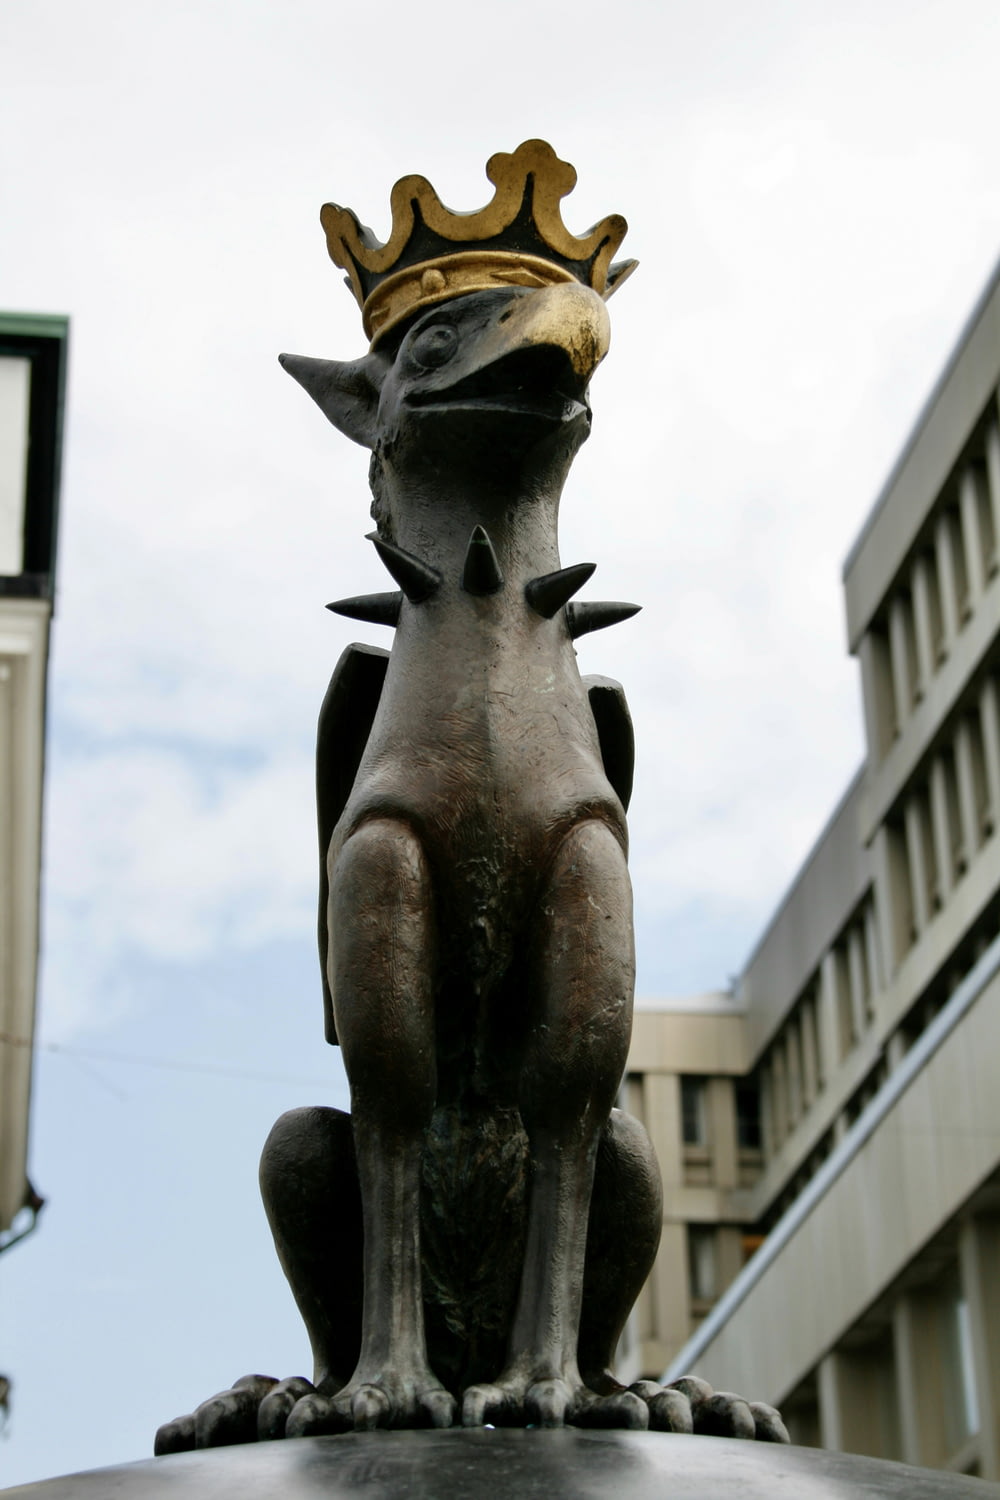 a statue of a dog with a crown on its head